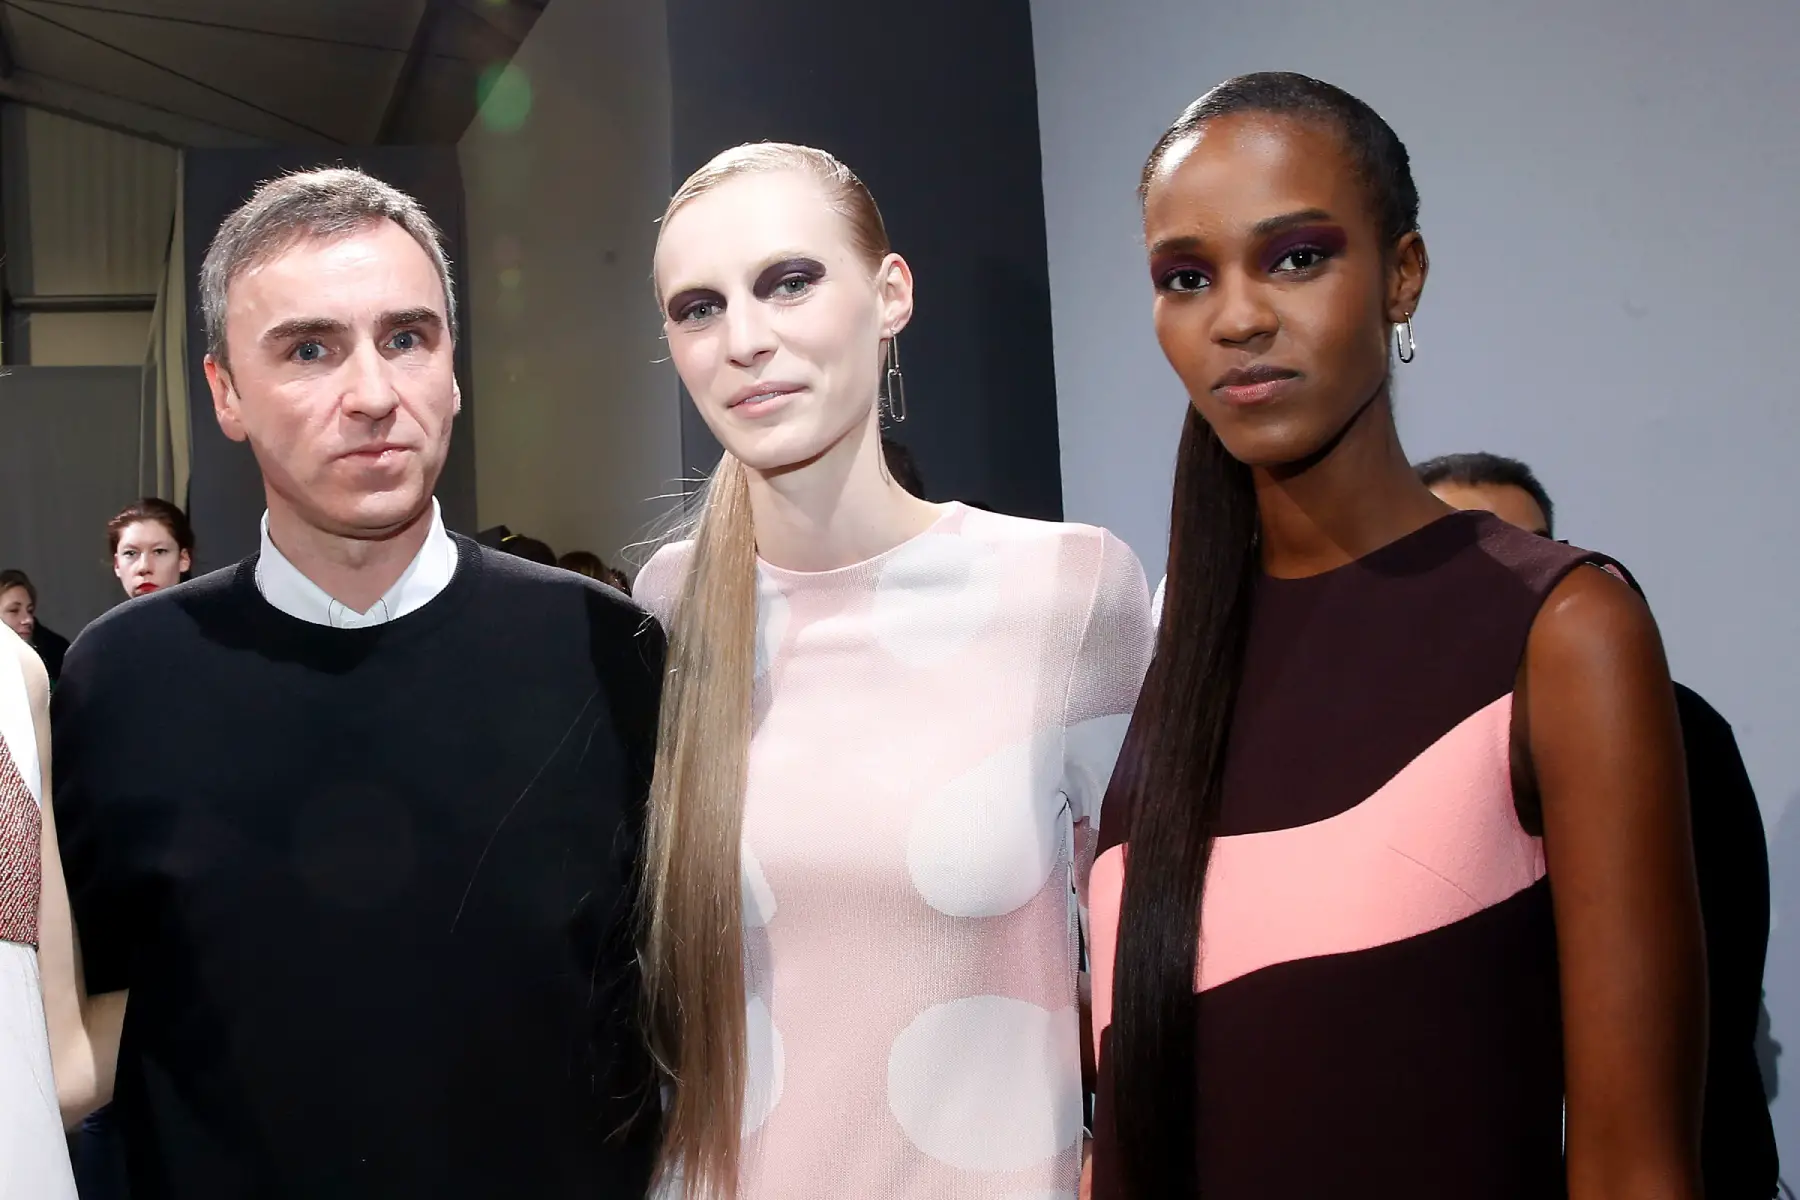 designer Raf Simons and his models pose backstage after the Christian Dior show during Paris Fashion Week in March 2015